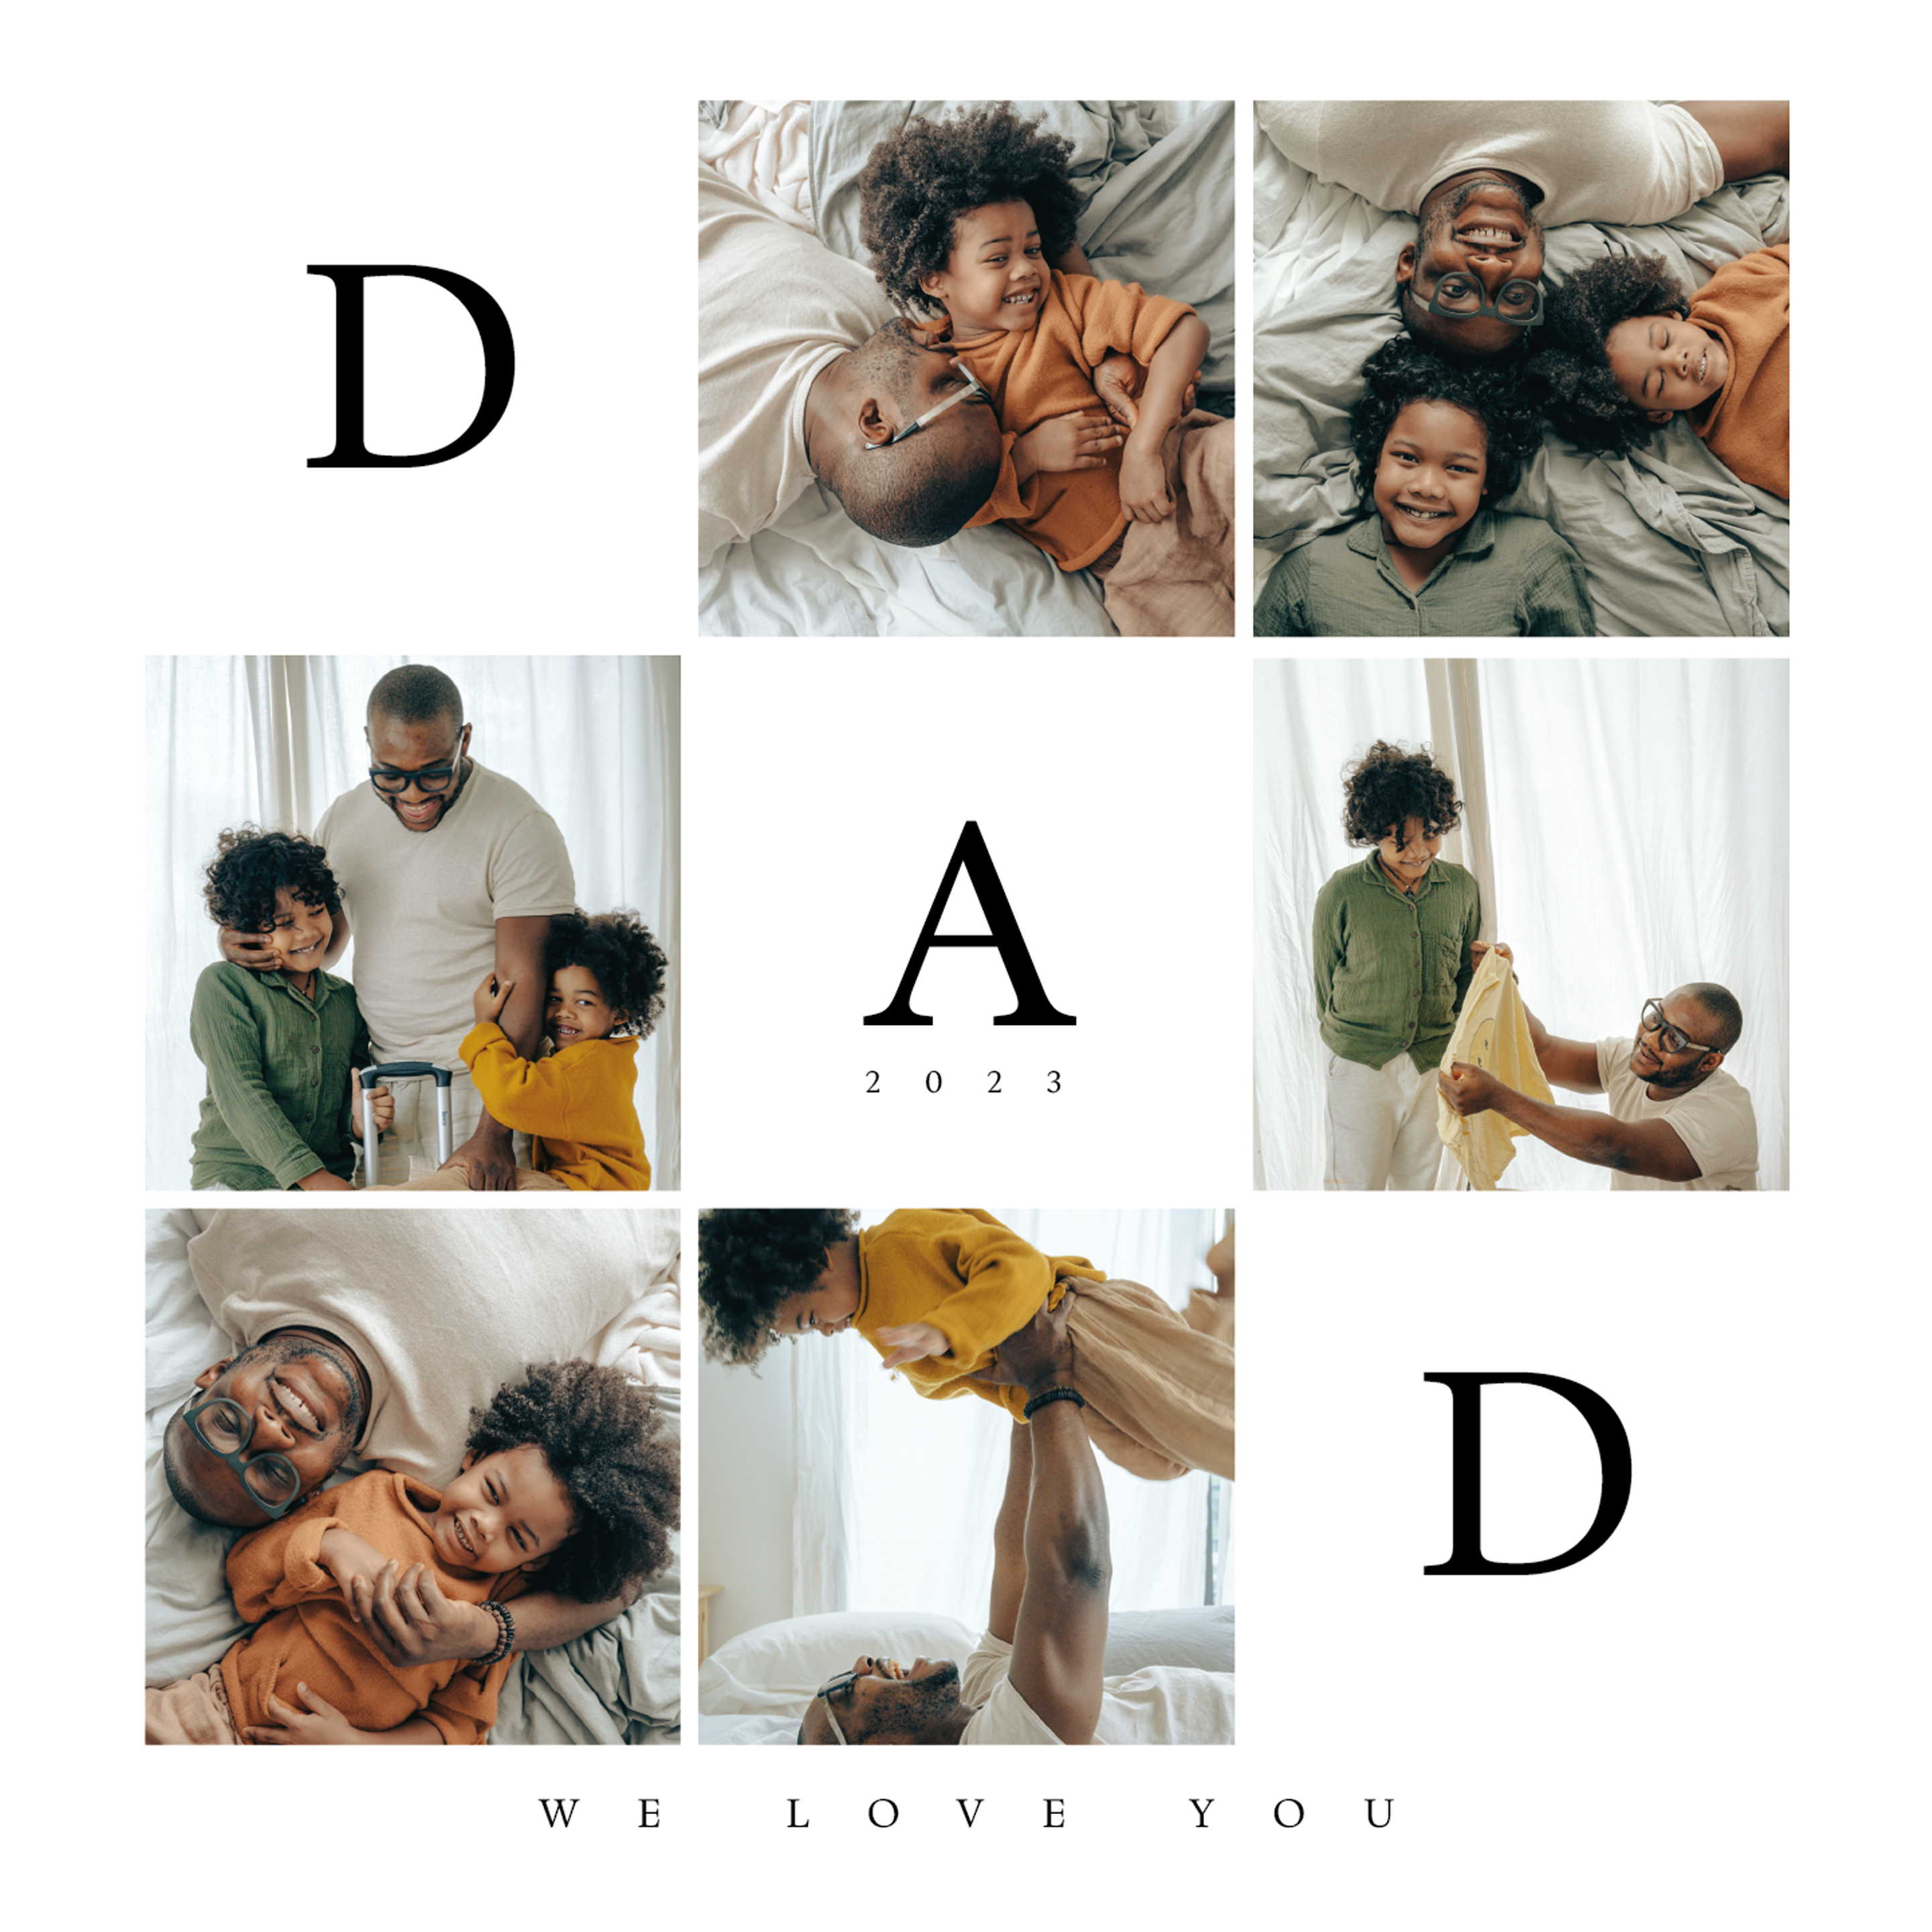 dad-we-love-you-collage-design-theme